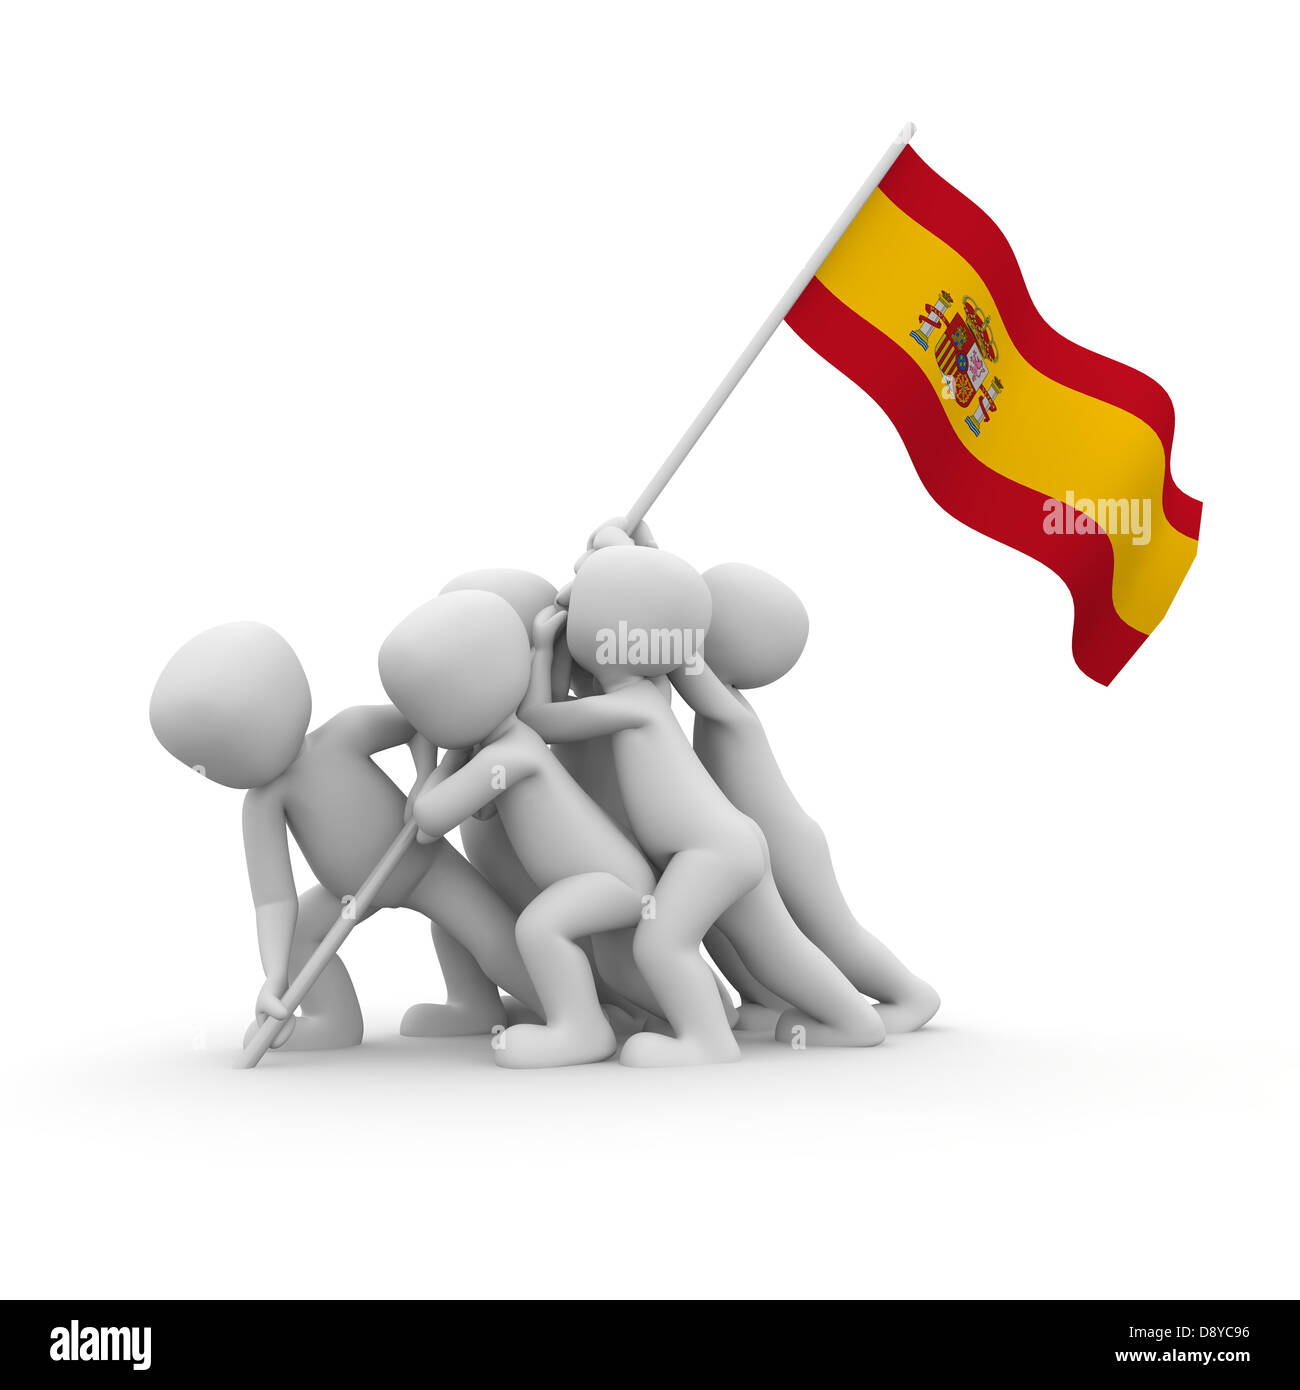 The characters want to hoist the Spanish flag together. Stock Photo